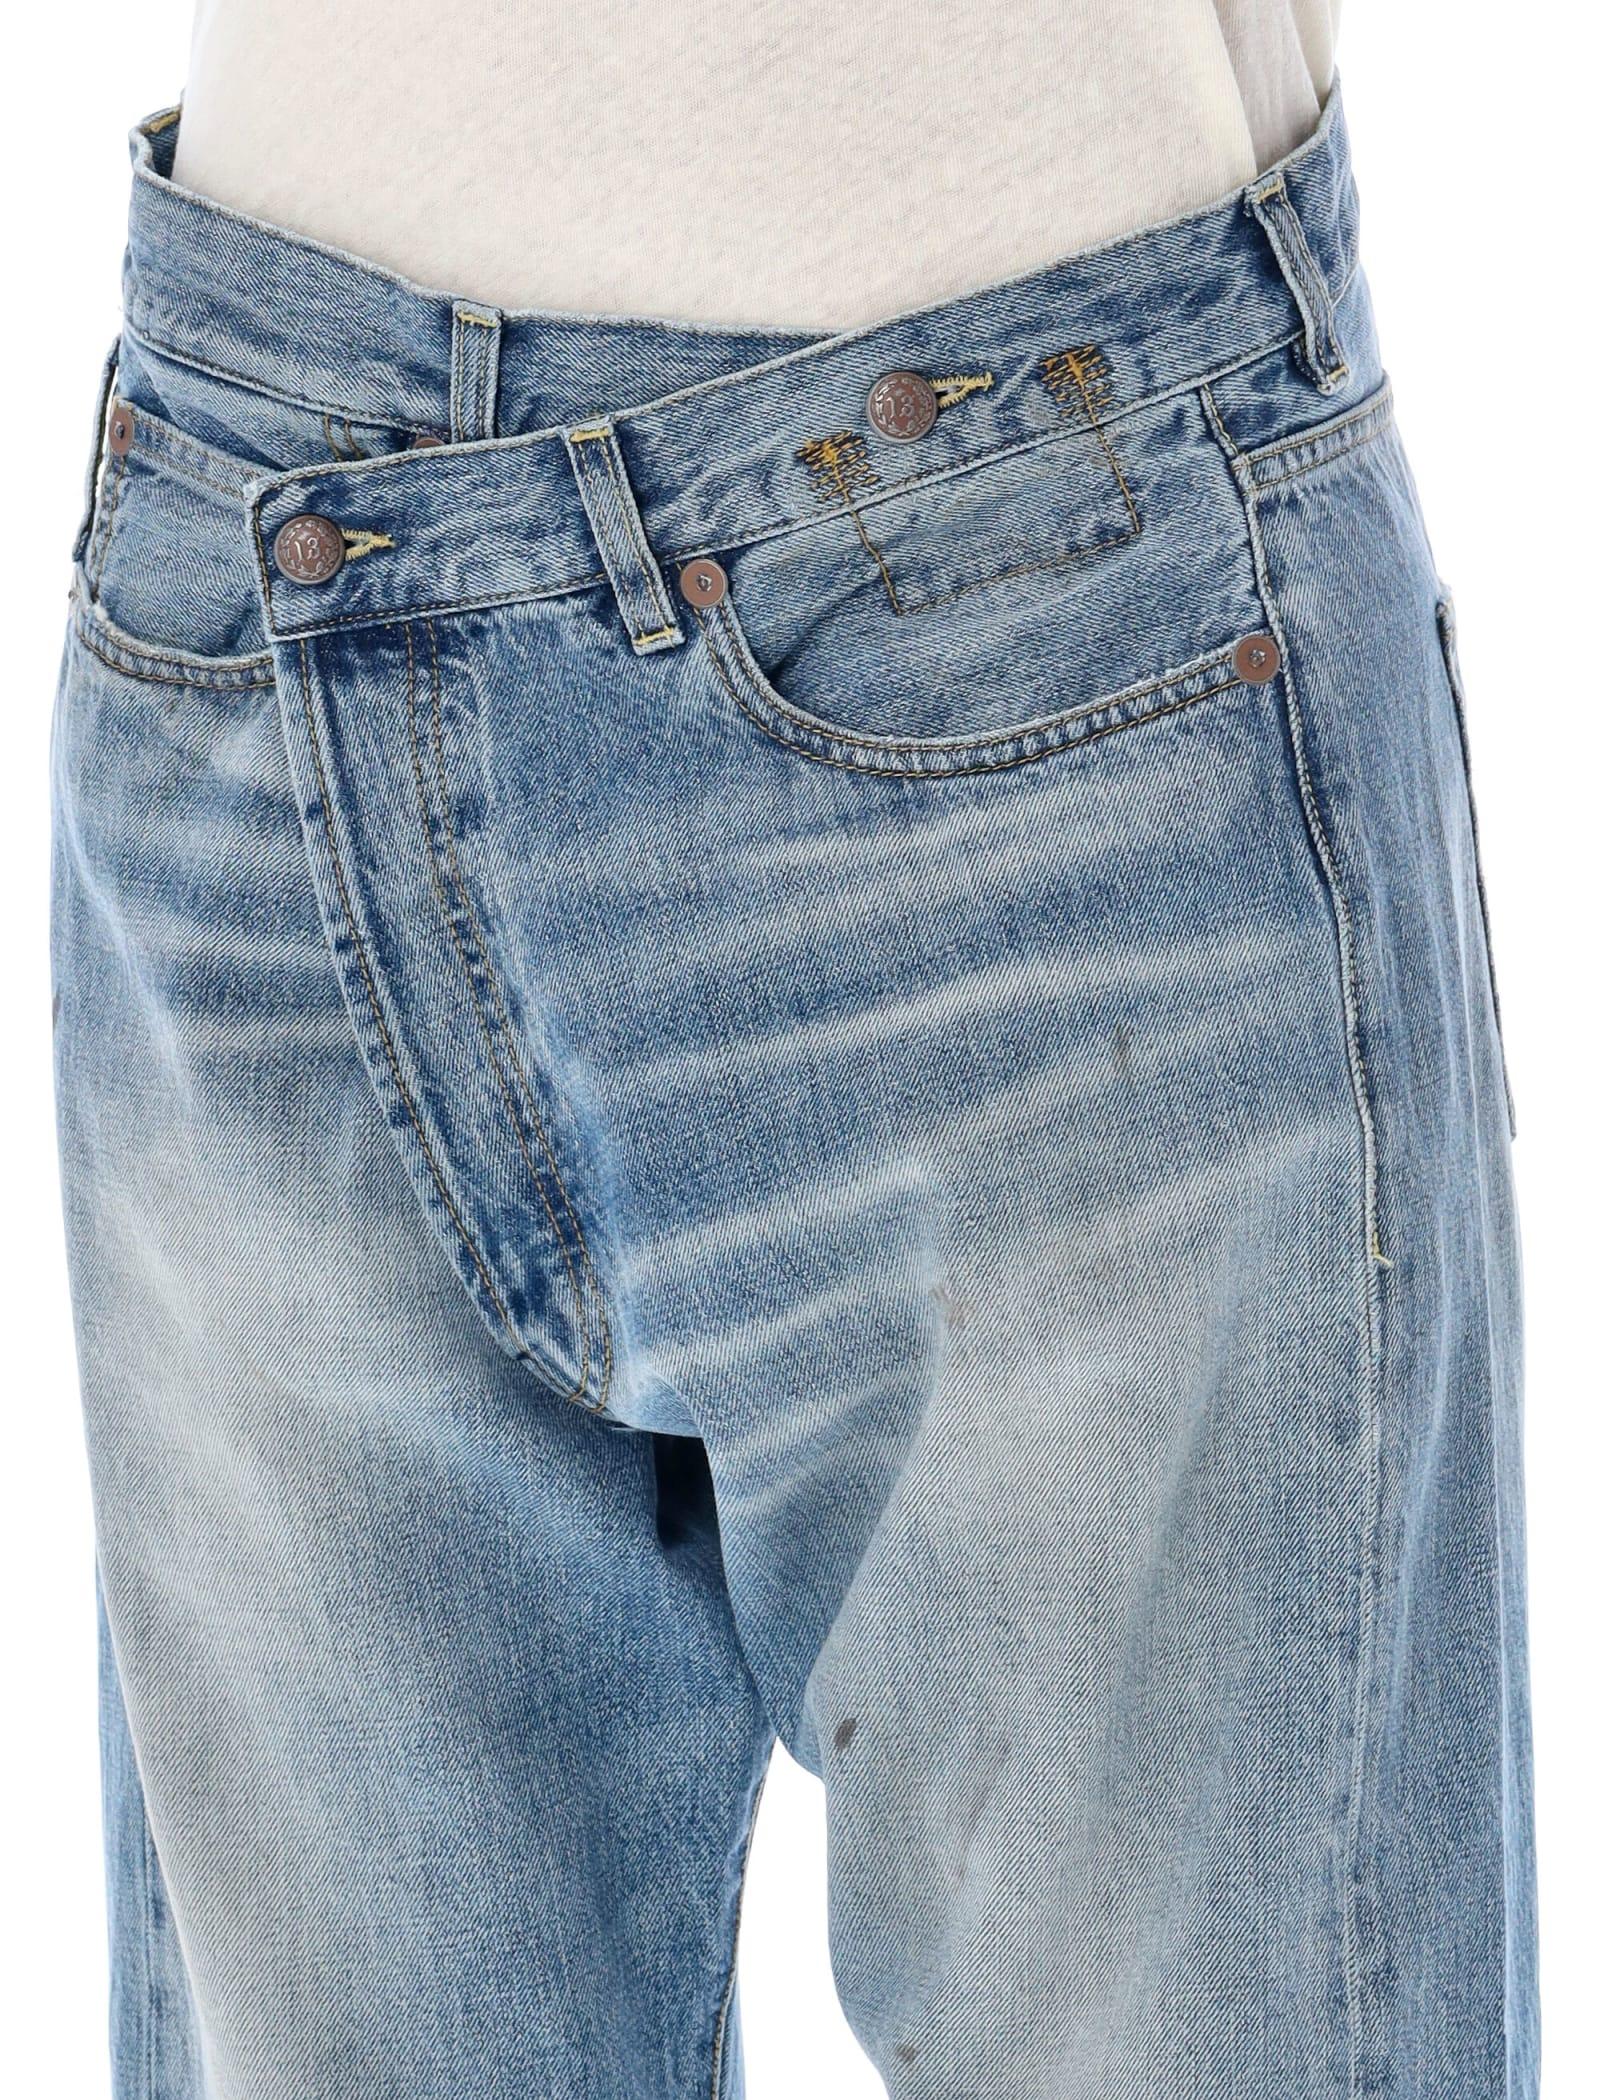 R13 Crossover Jeans in Blue | Lyst